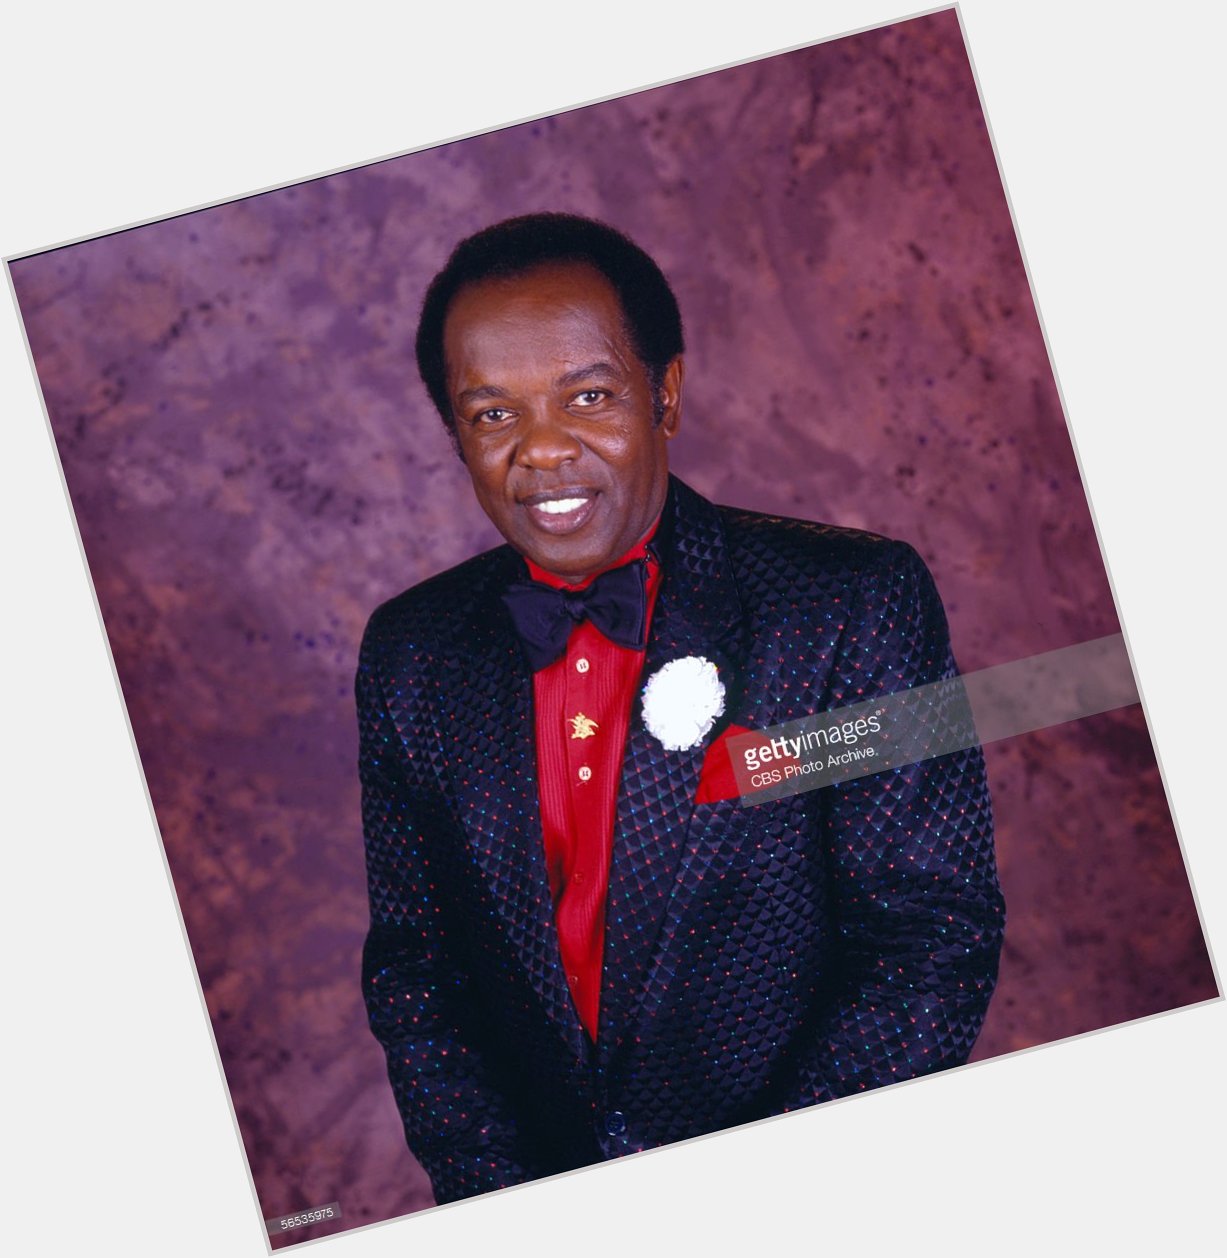 Happy Birthday to Lou Rawls, who would have turned 84 today! 